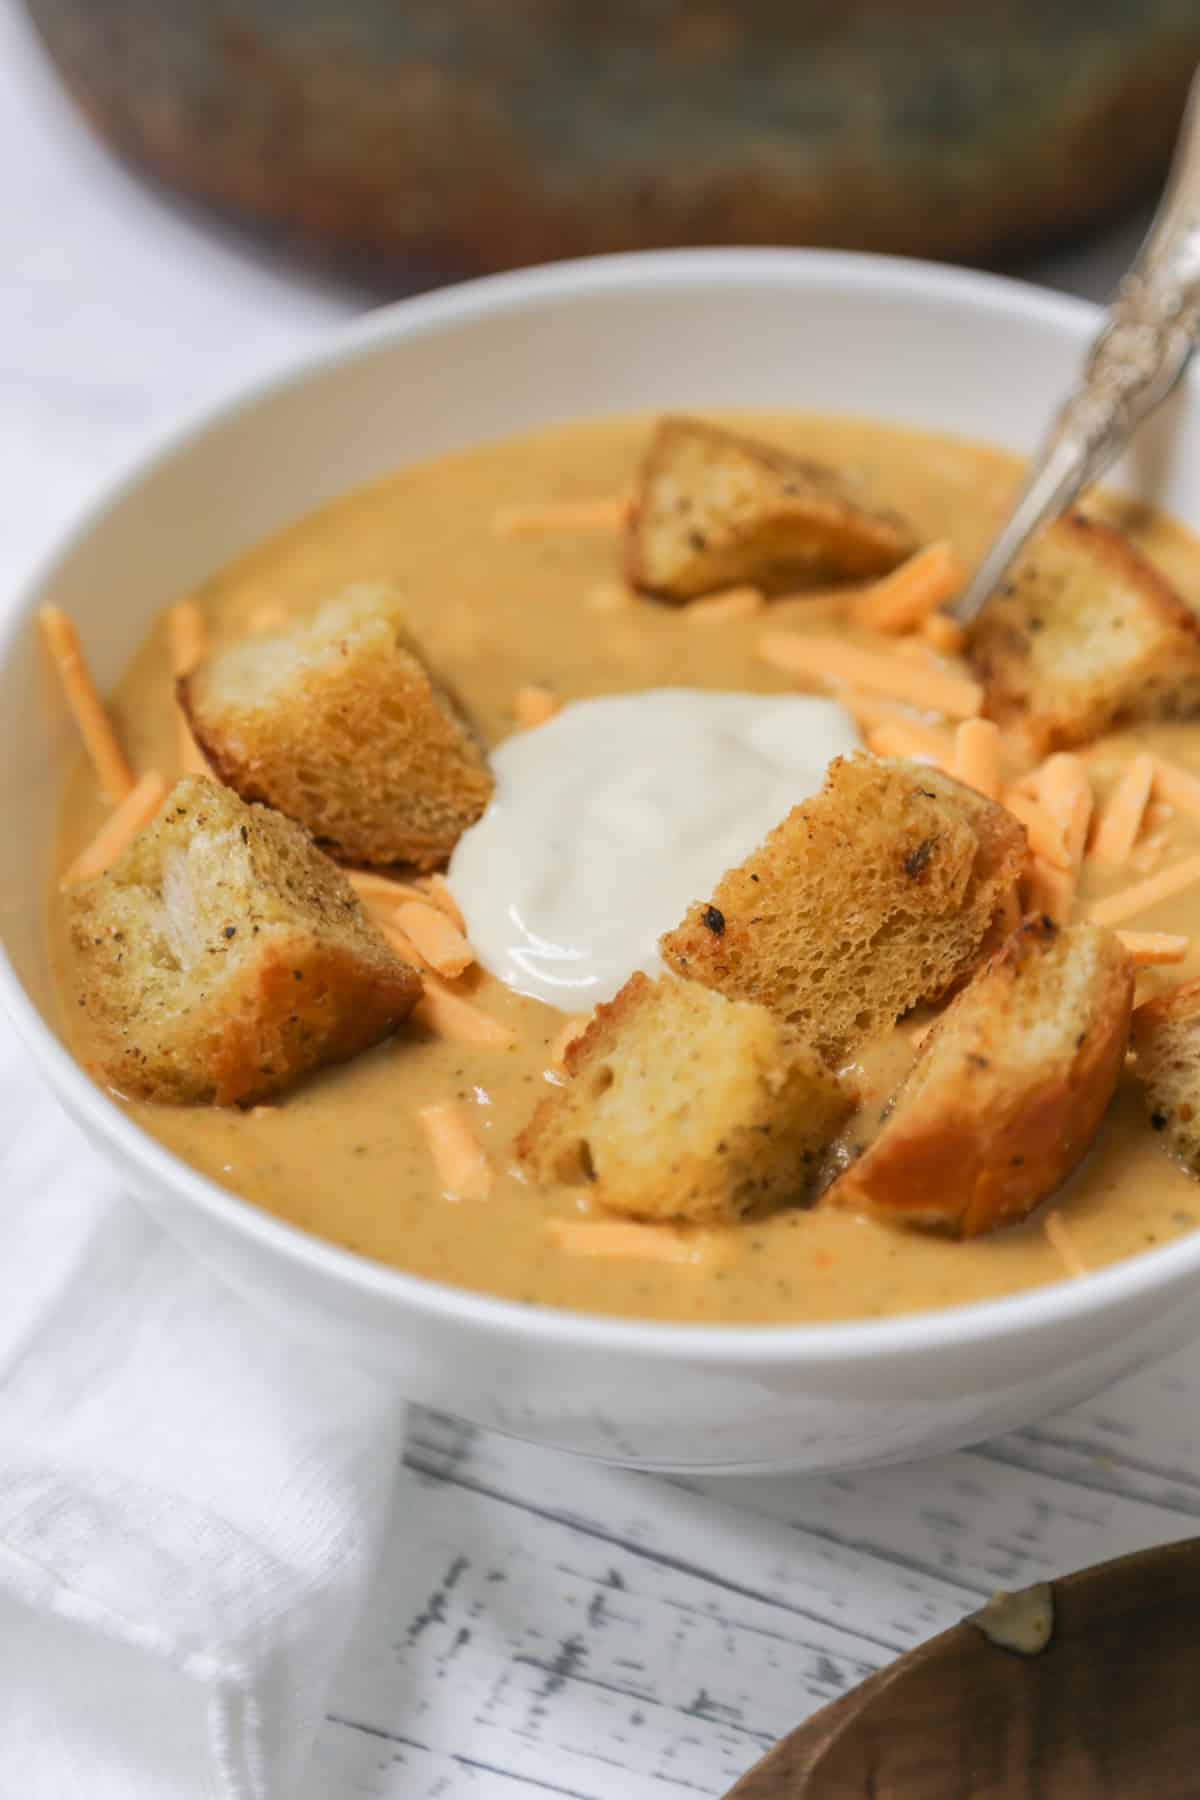 A bowl of cheddar broccoli soup with croutons, sour cream and shredded cheese.